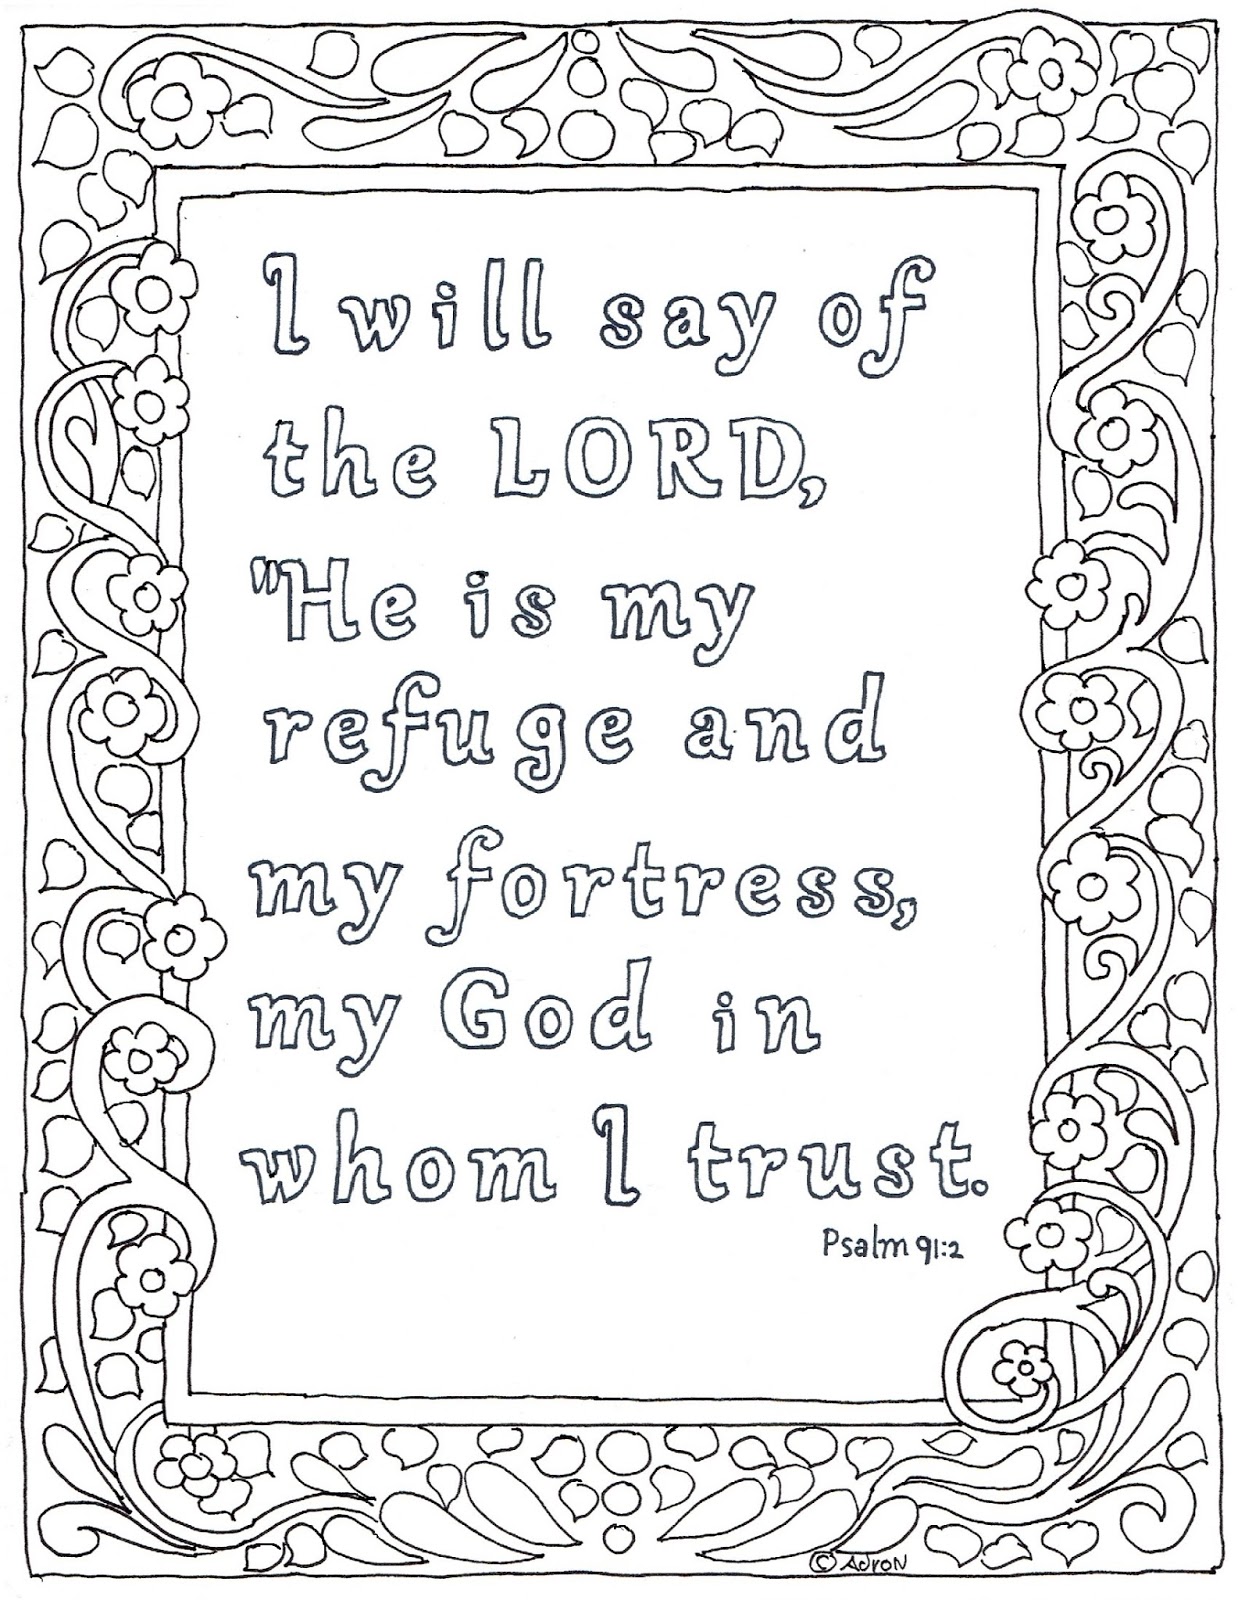 coloring-pages-for-kids-by-mr-adron-the-lord-is-my-refuge-bible